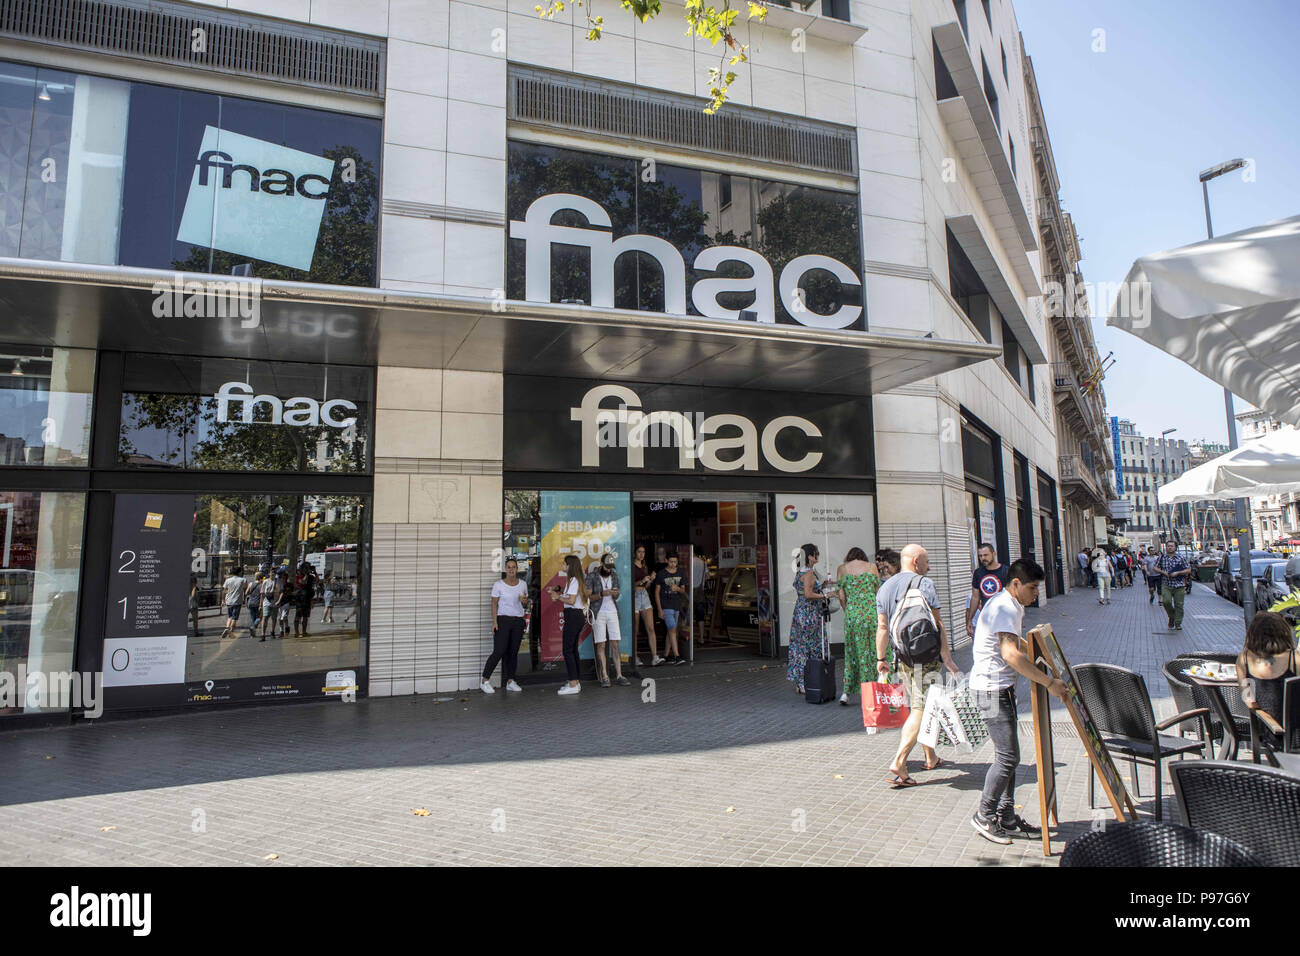 Barcelona, Barcelona, Spain. 12th July, 2018. Fnac shop on Passeig de GrÃ  cia street in Barcelona.Barcelona is a city in Spain. It is the capital and  largest city of Catalonia, as well